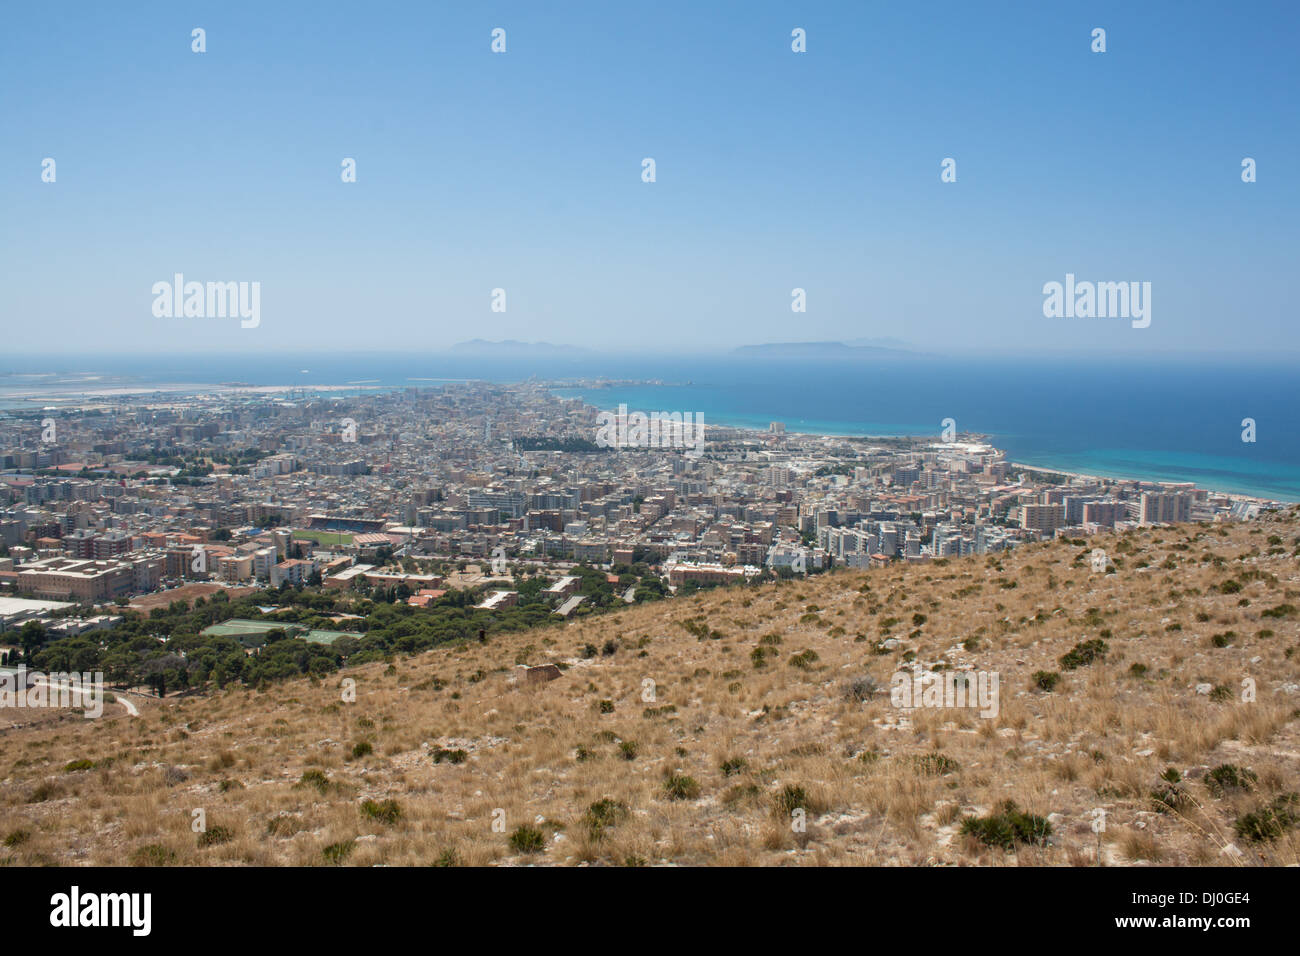 seas, blue,  landscape, islands, hill, land, dirt, town, city, Trapani, Sicily, Italy,  high up, mountain, nature, on high,beach Stock Photo